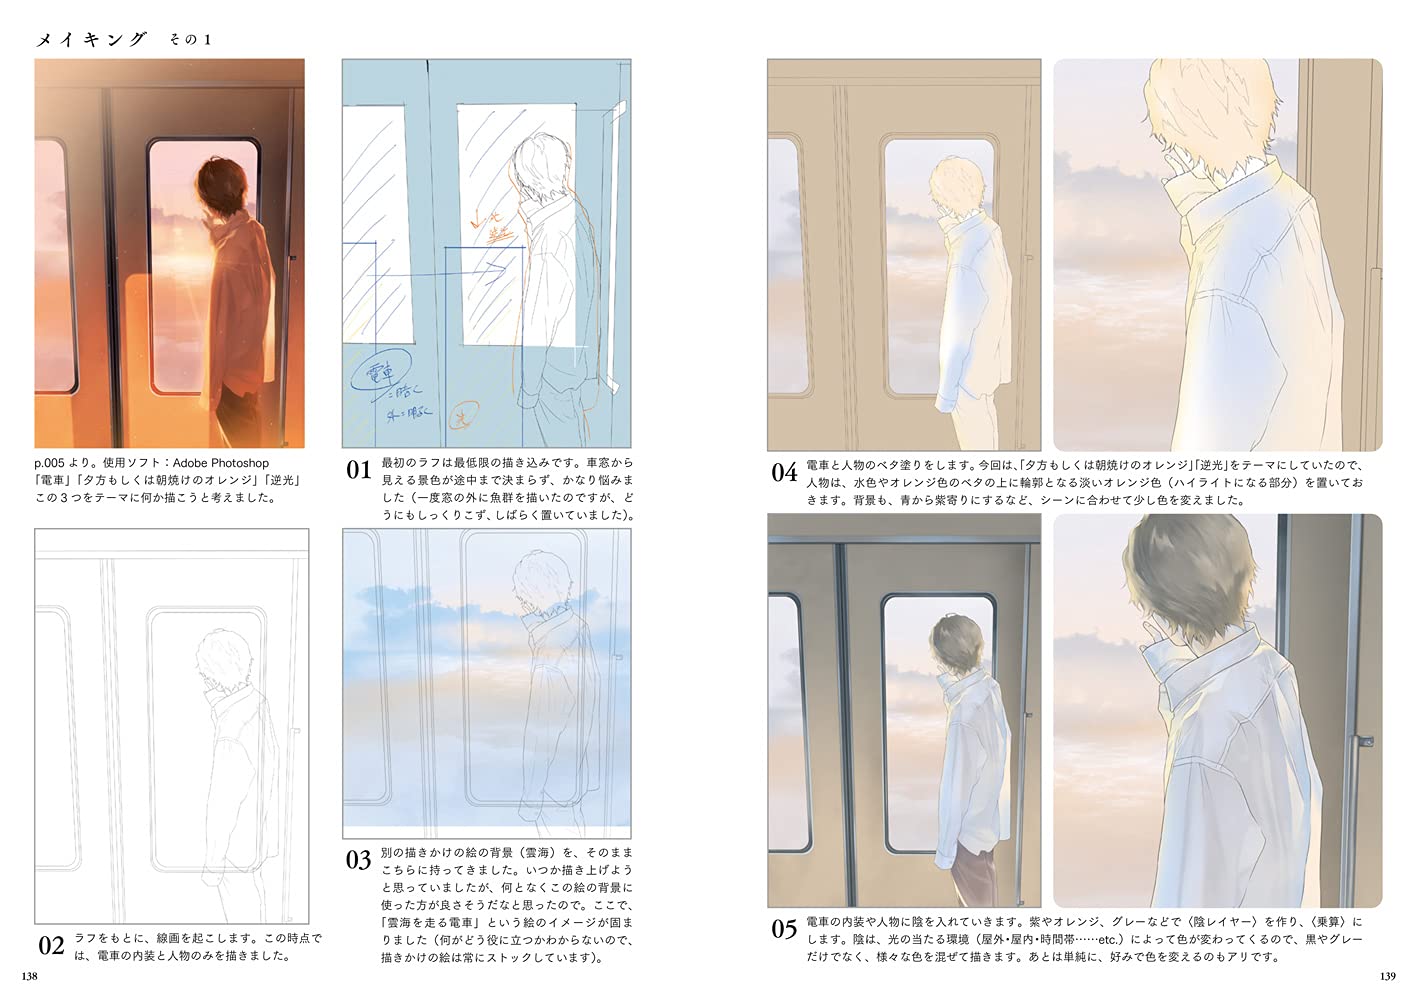 Re° Collected Artworks 2014-2021 Light